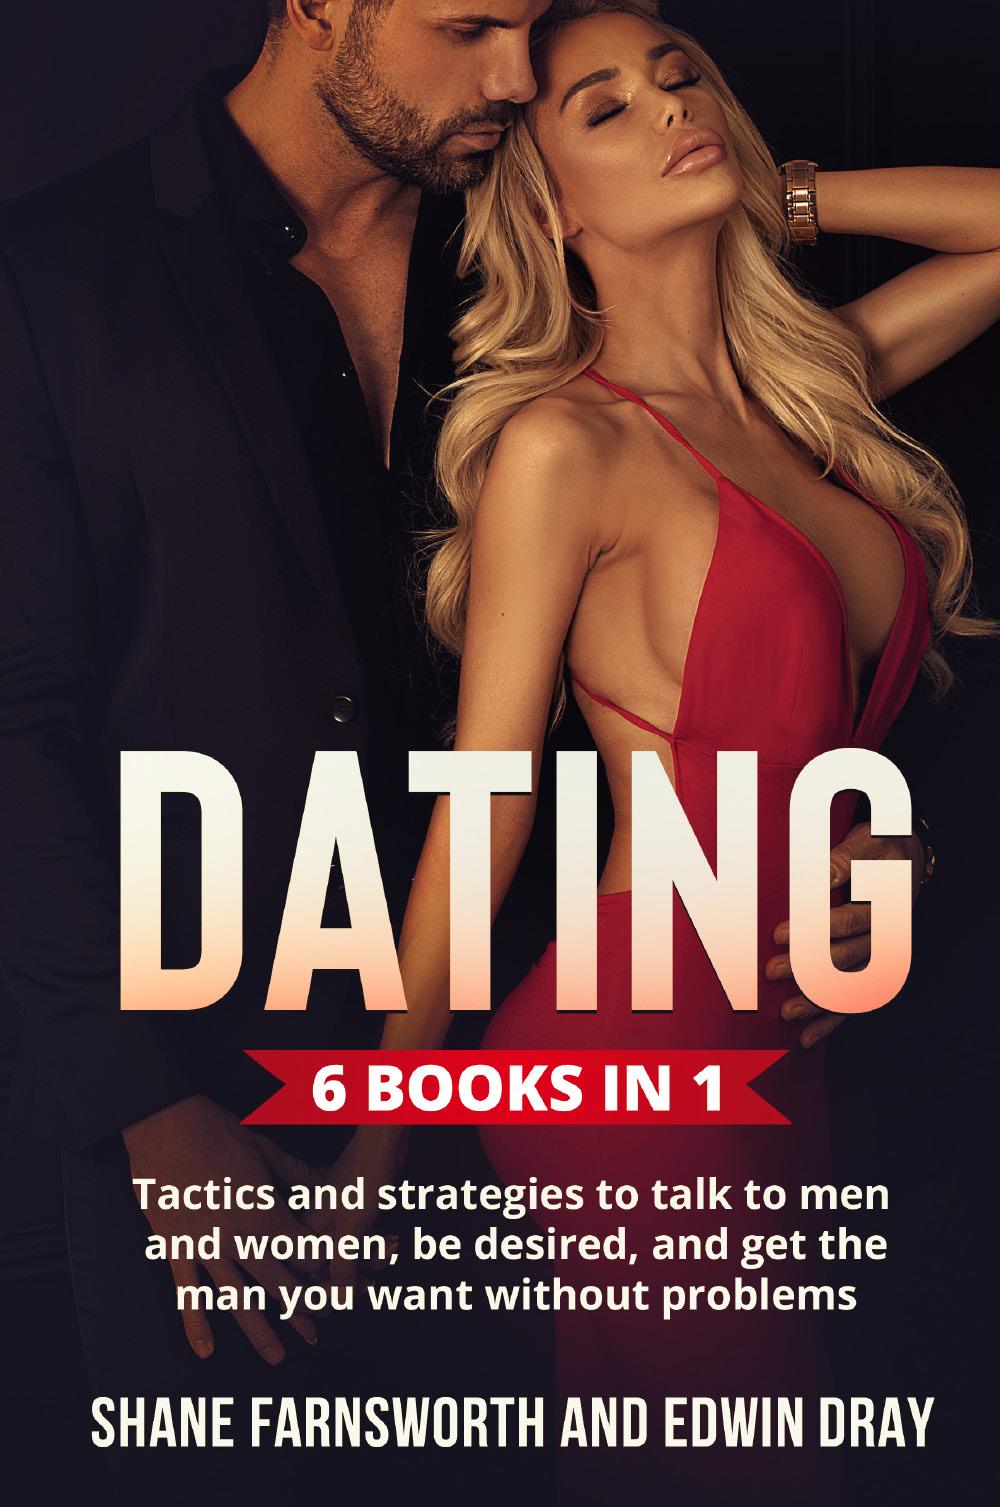 Dating (6 Books in 1). Tactics and strategies to talk to men and women, be desired, and get the man you want without problems.